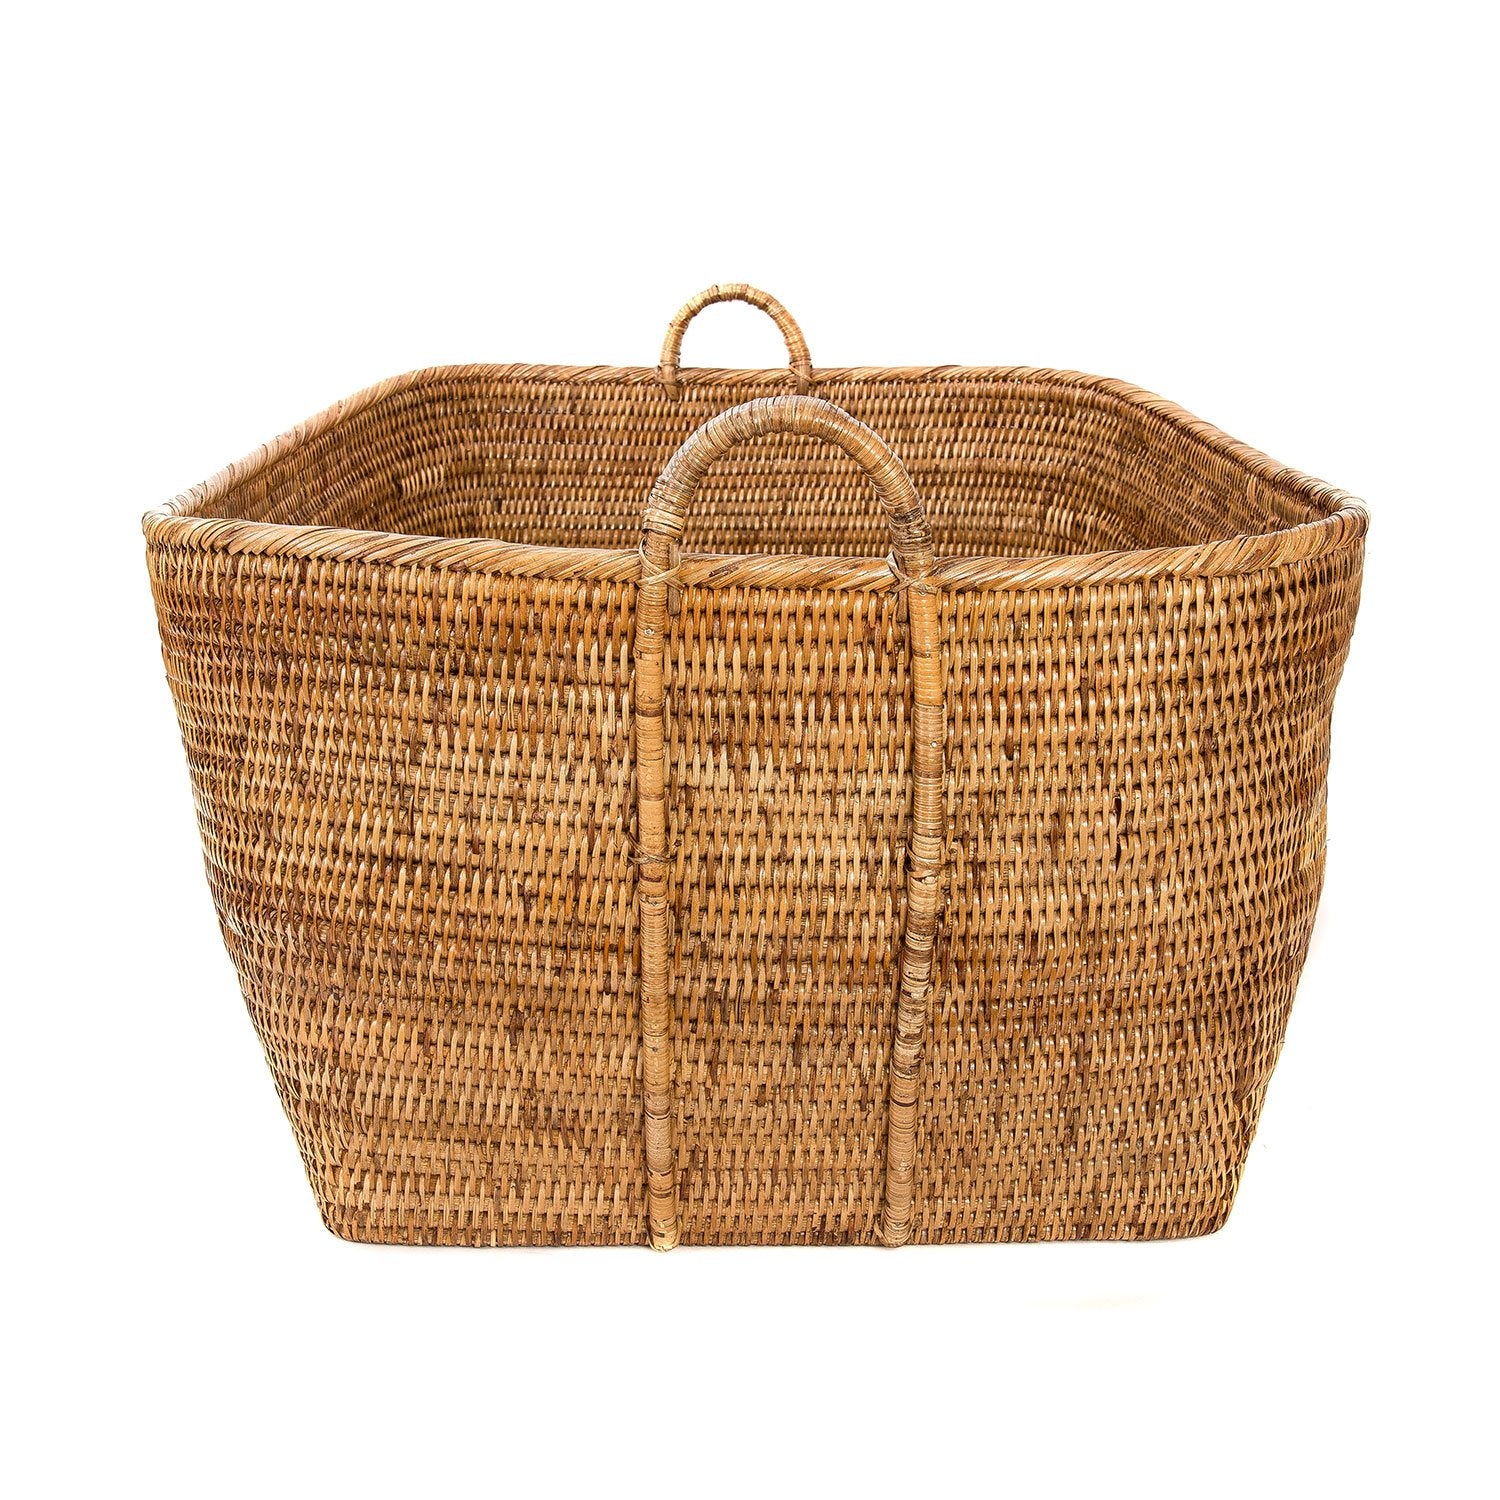 Honey Woven Basket with Handles